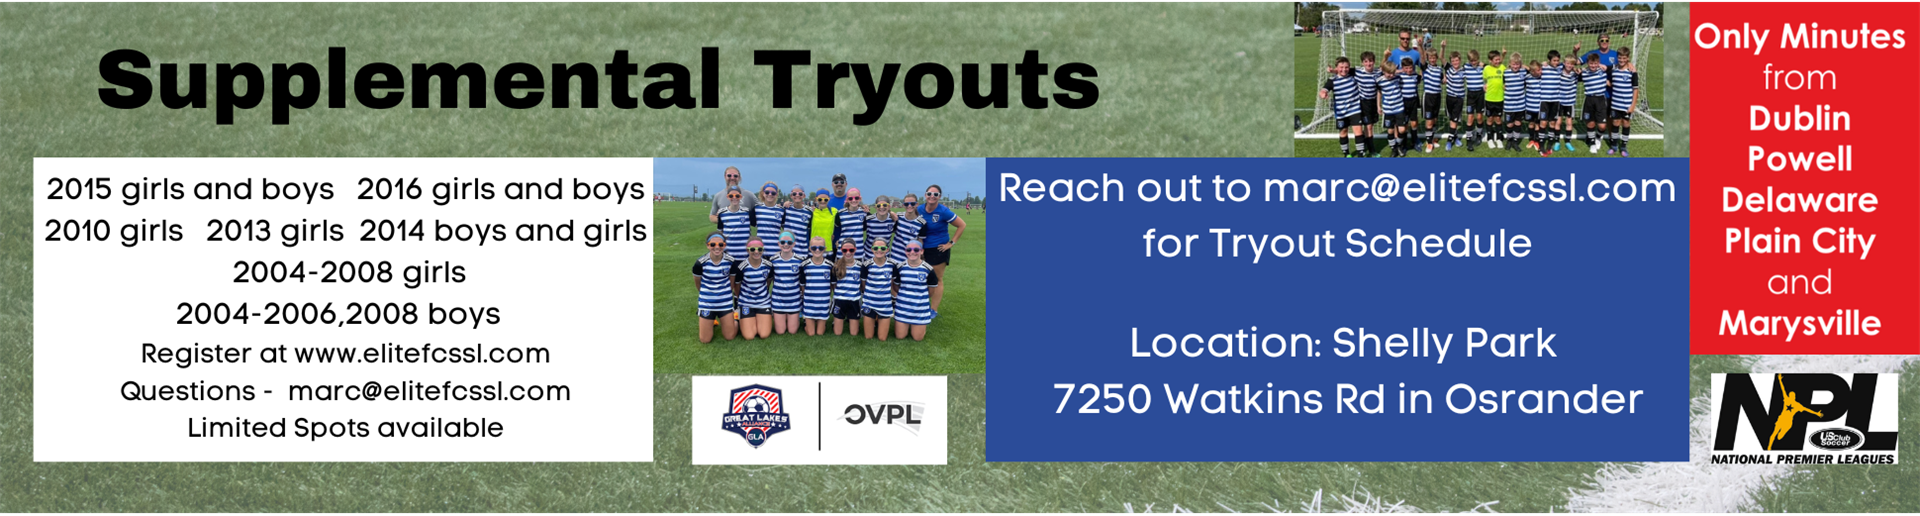 Supplemental Tryouts for Spring23 Spots 